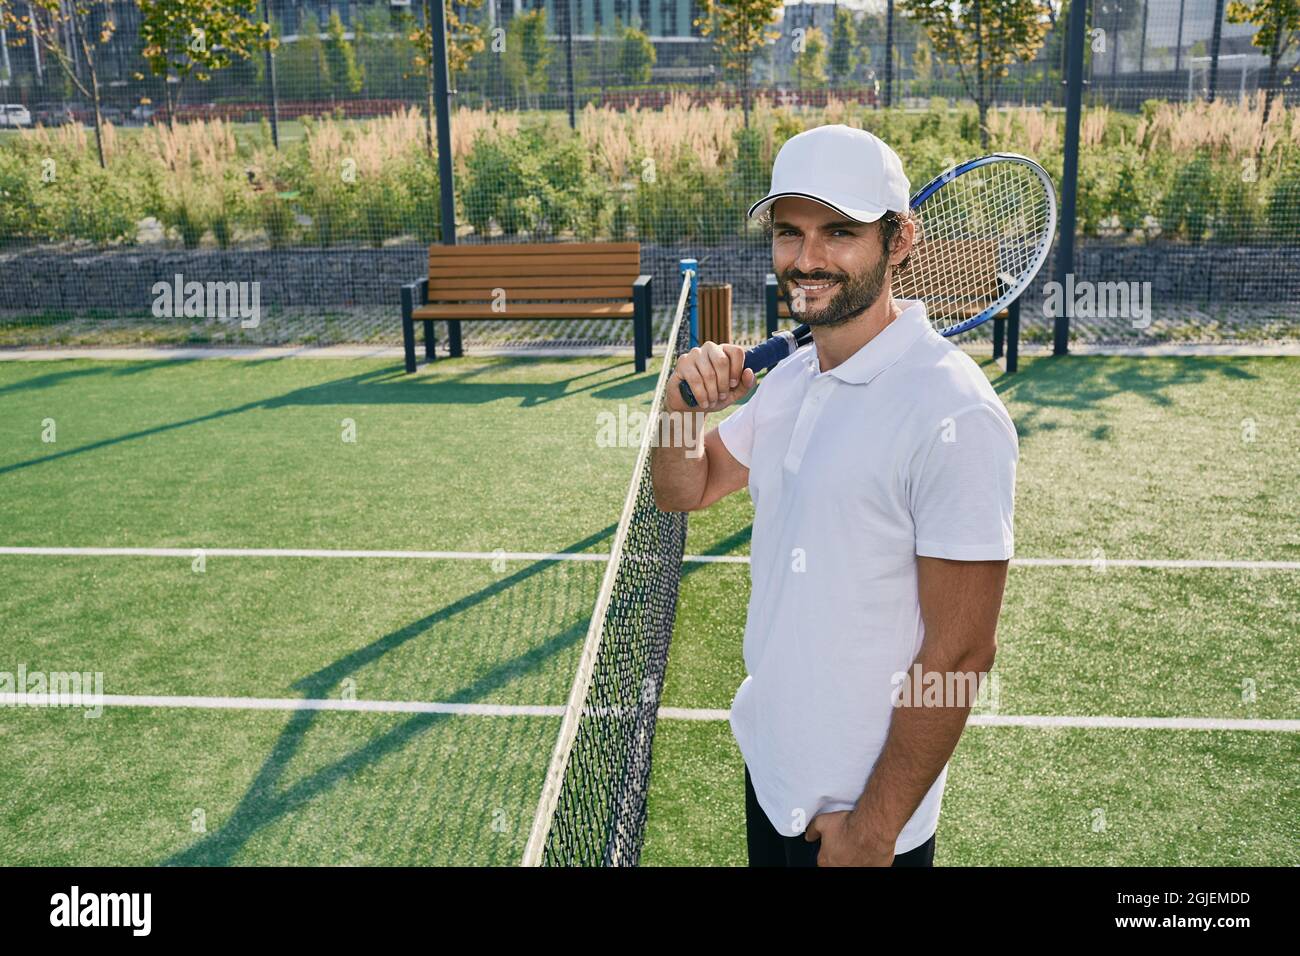 Professional tennis player with racket posing near net on grass tennis court Stock Photo